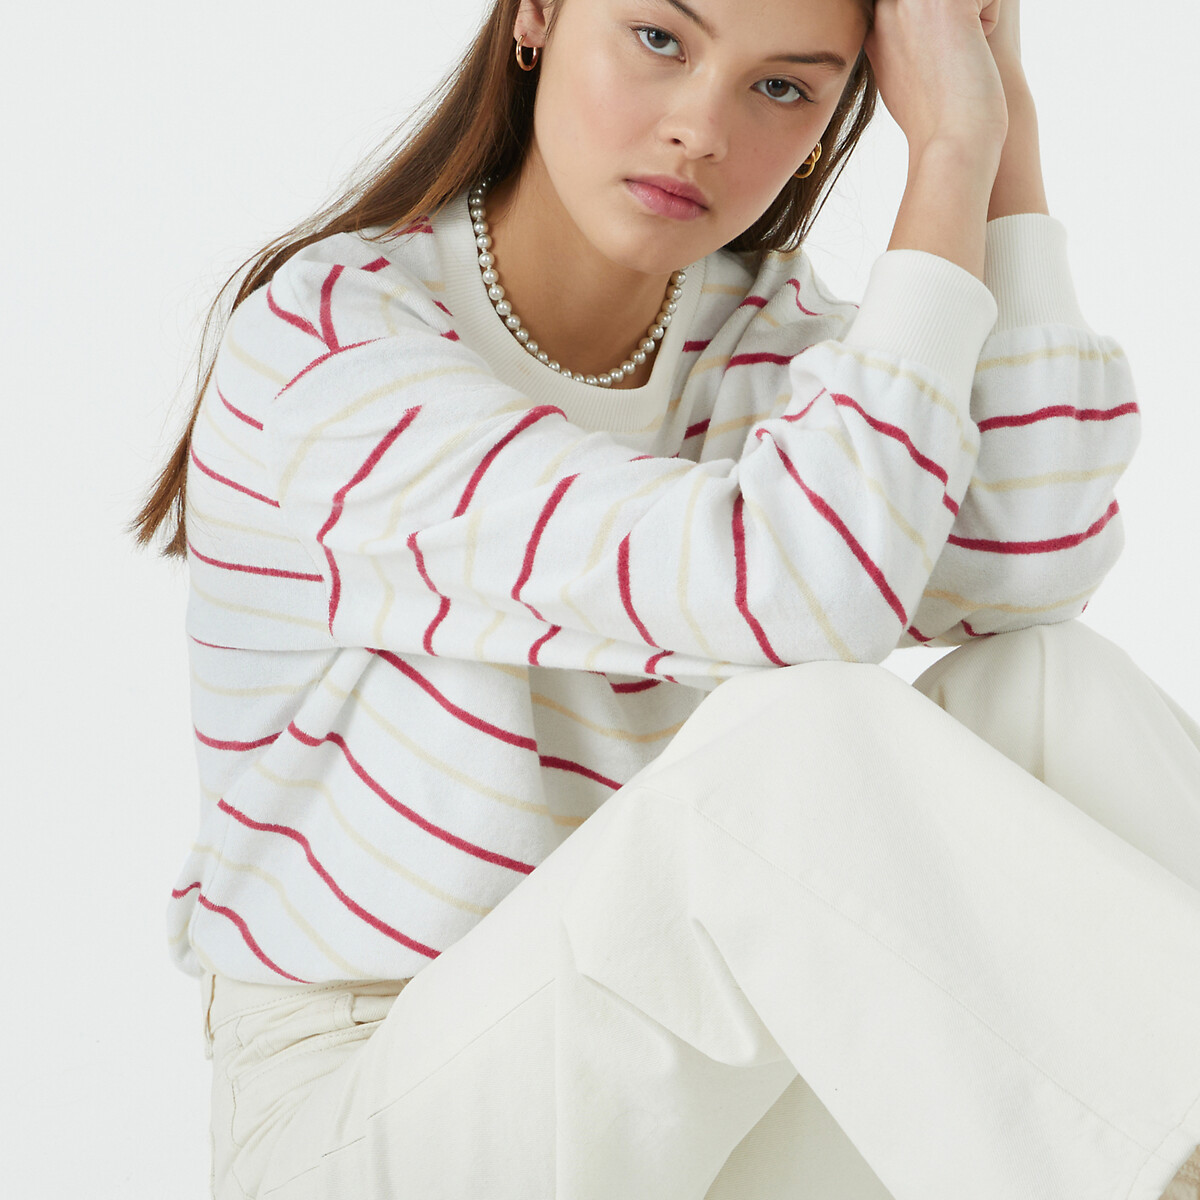 Striped Towelling Sweatshirt in Cotton Mix